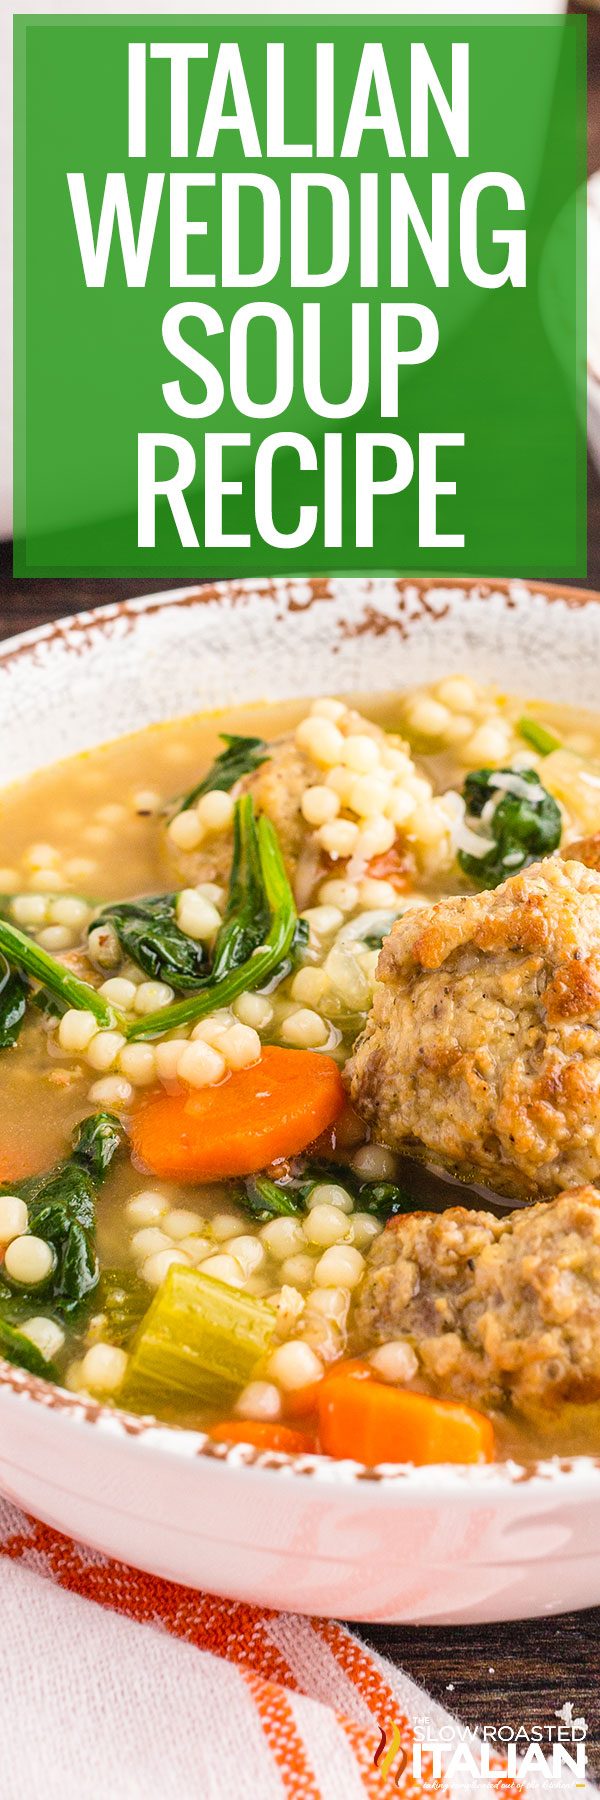 titled image (and shown): Italian wedding soup recipe